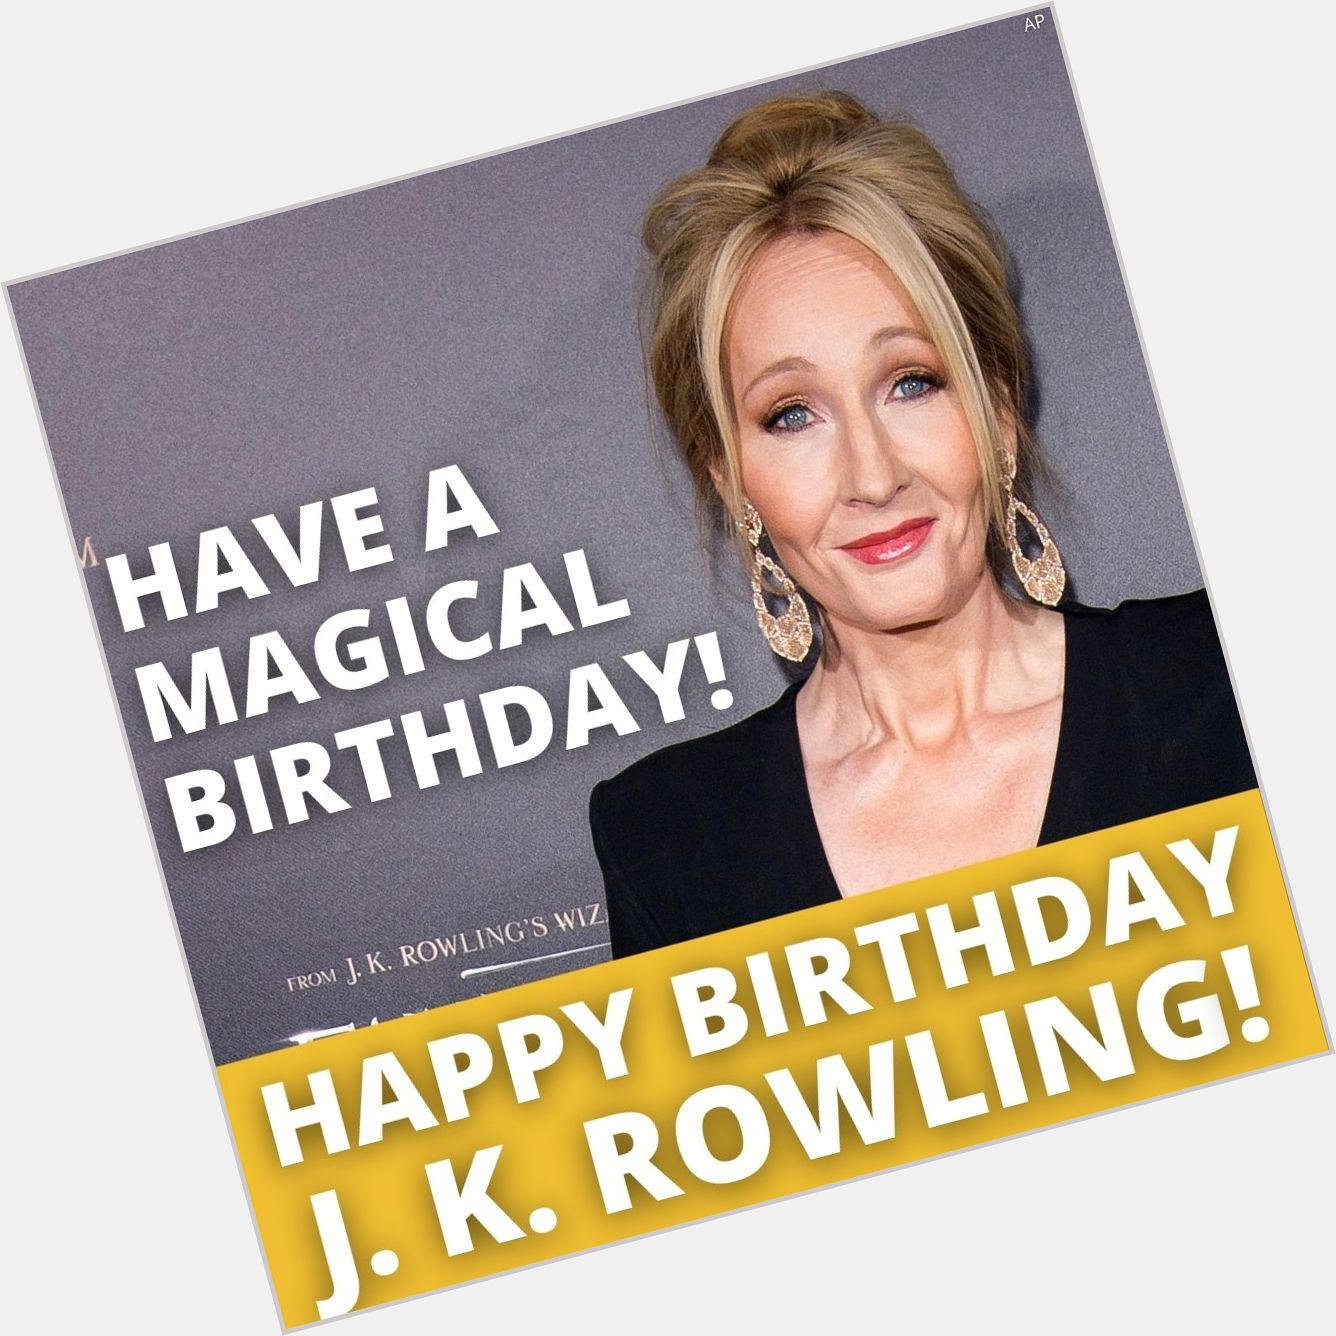 Happy Birthday to J.K. Rowling. Does a certain wizard come to mind when you think of her?  